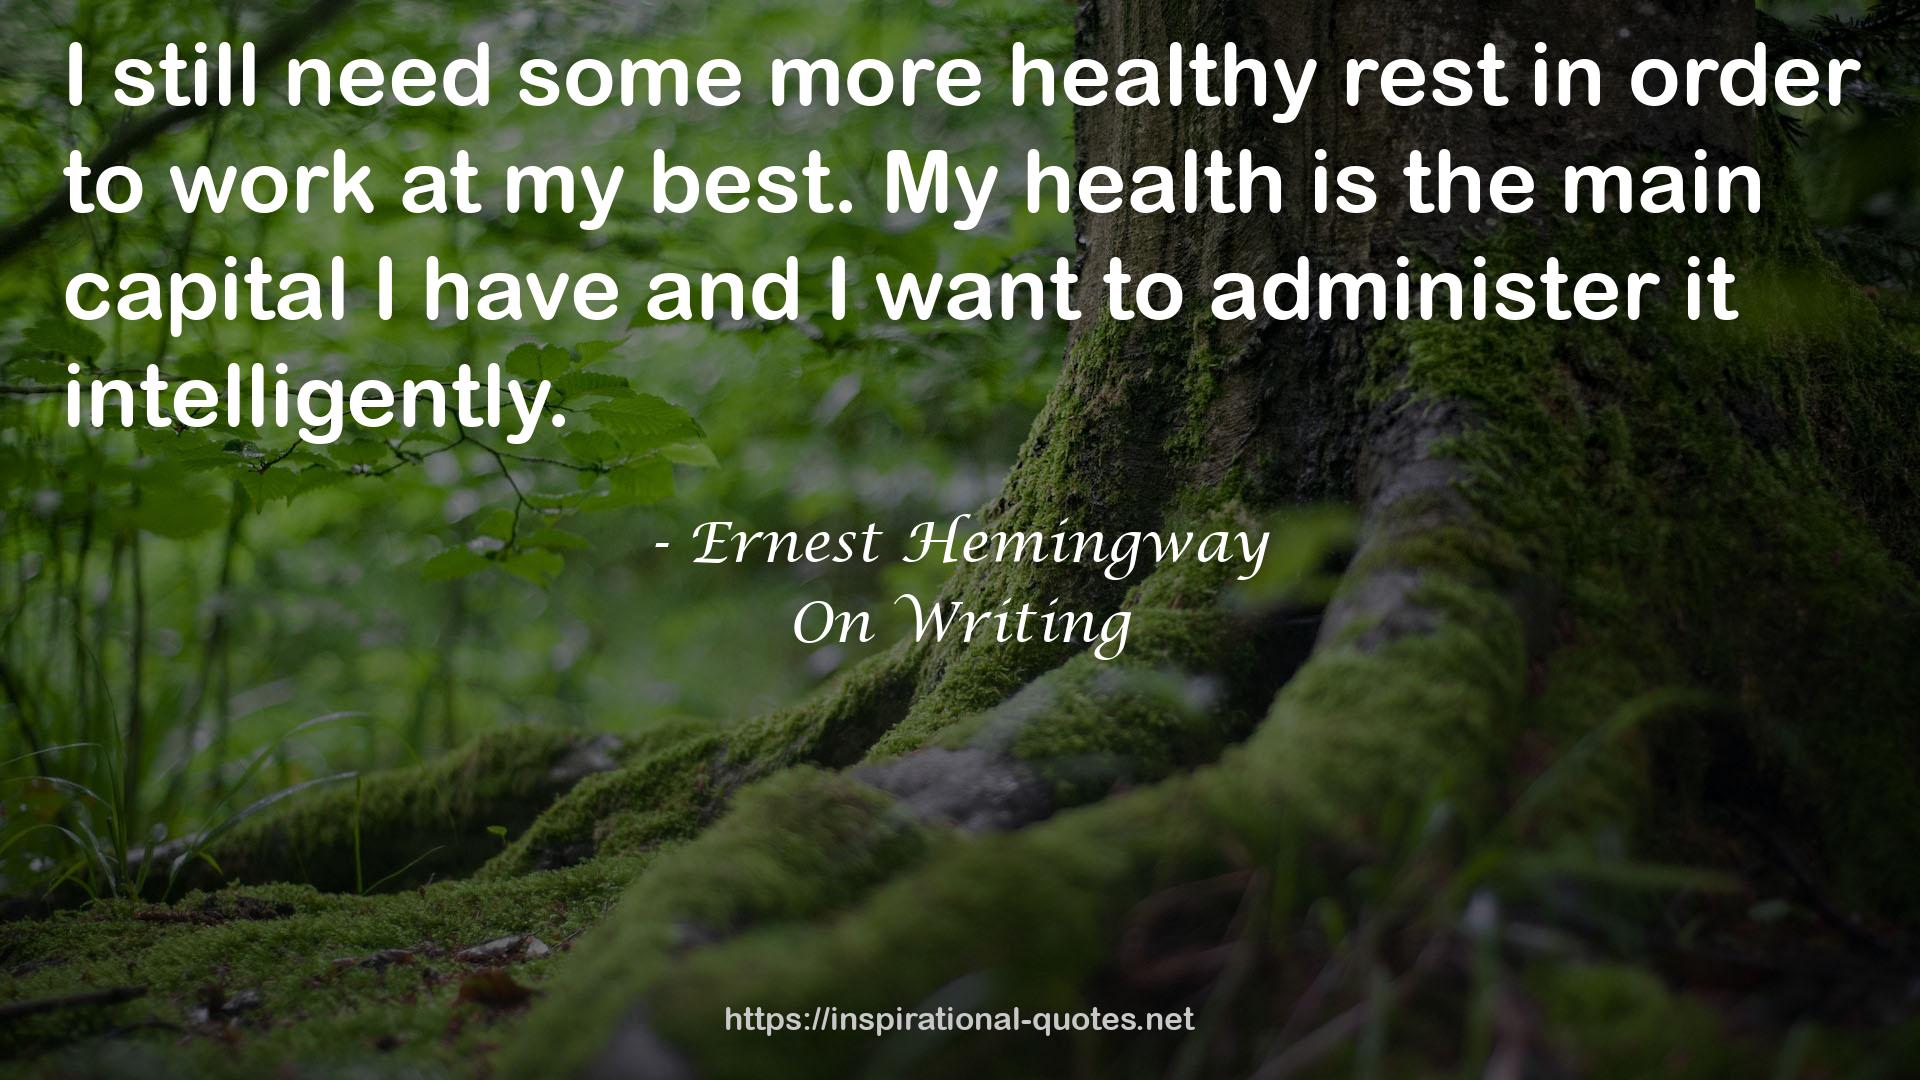 some more healthy rest  QUOTES